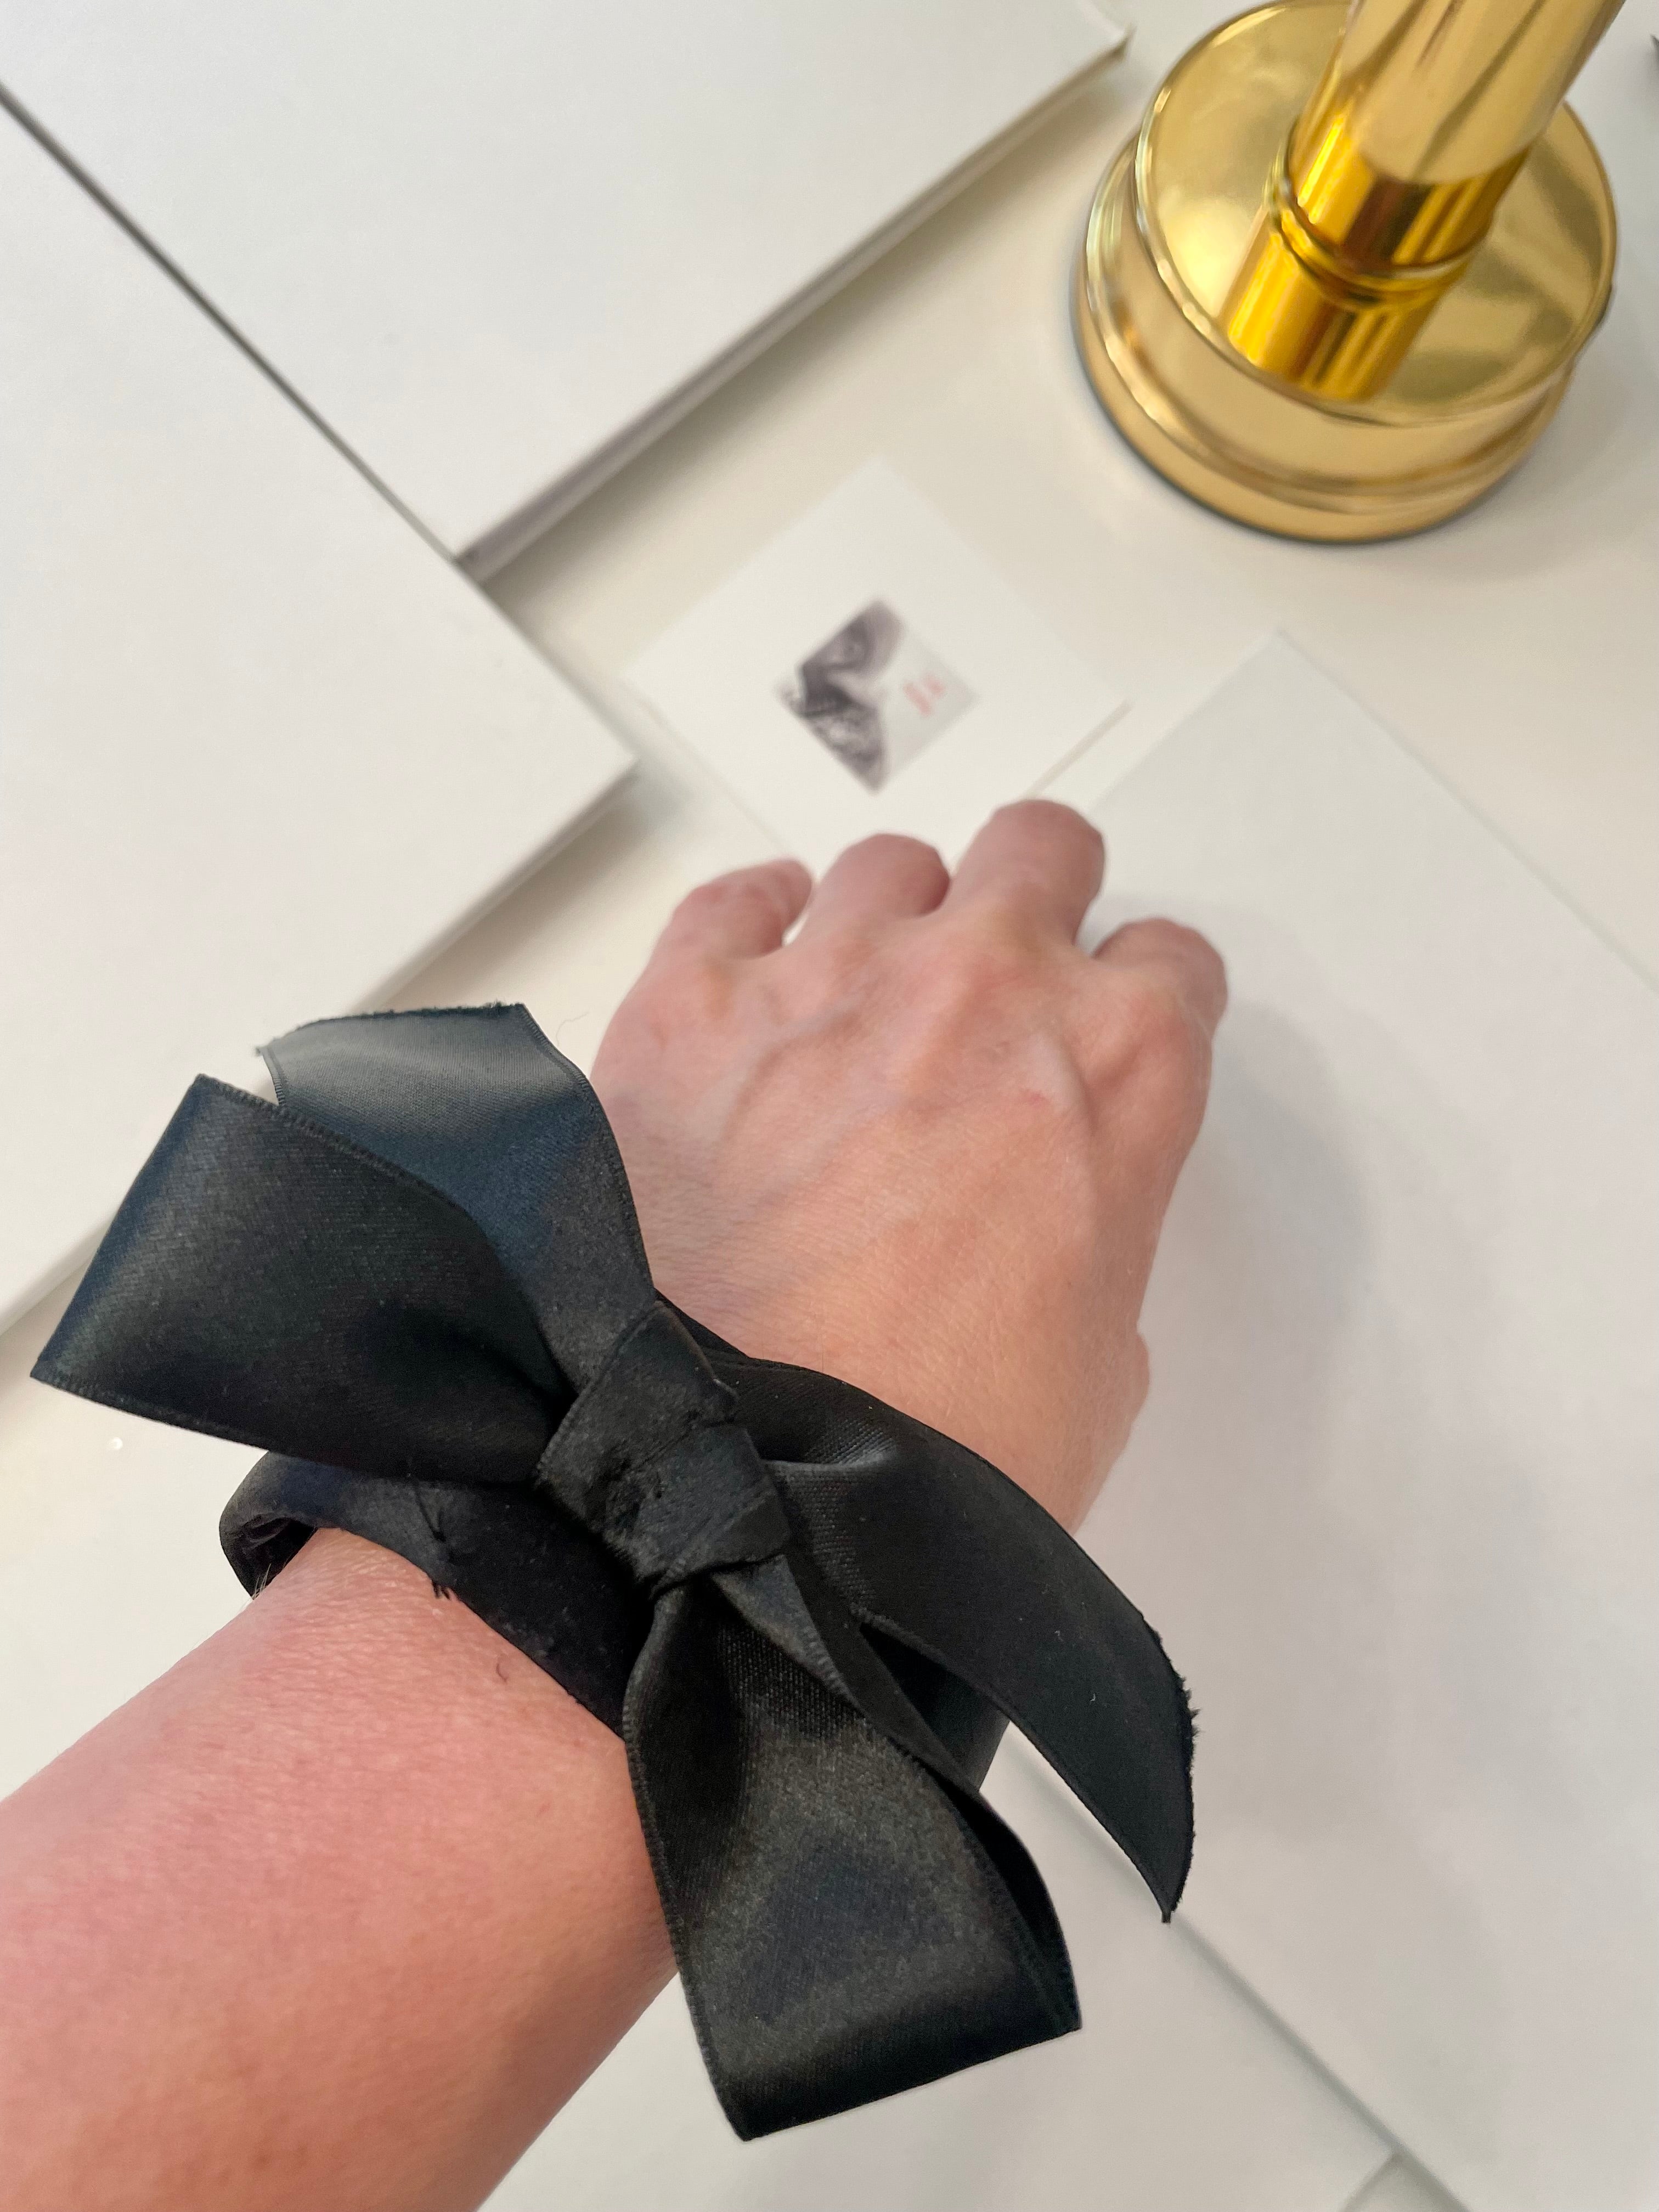 Ladies on Holiday. classic satin bow bracelet... one of a kind, and just so classy!